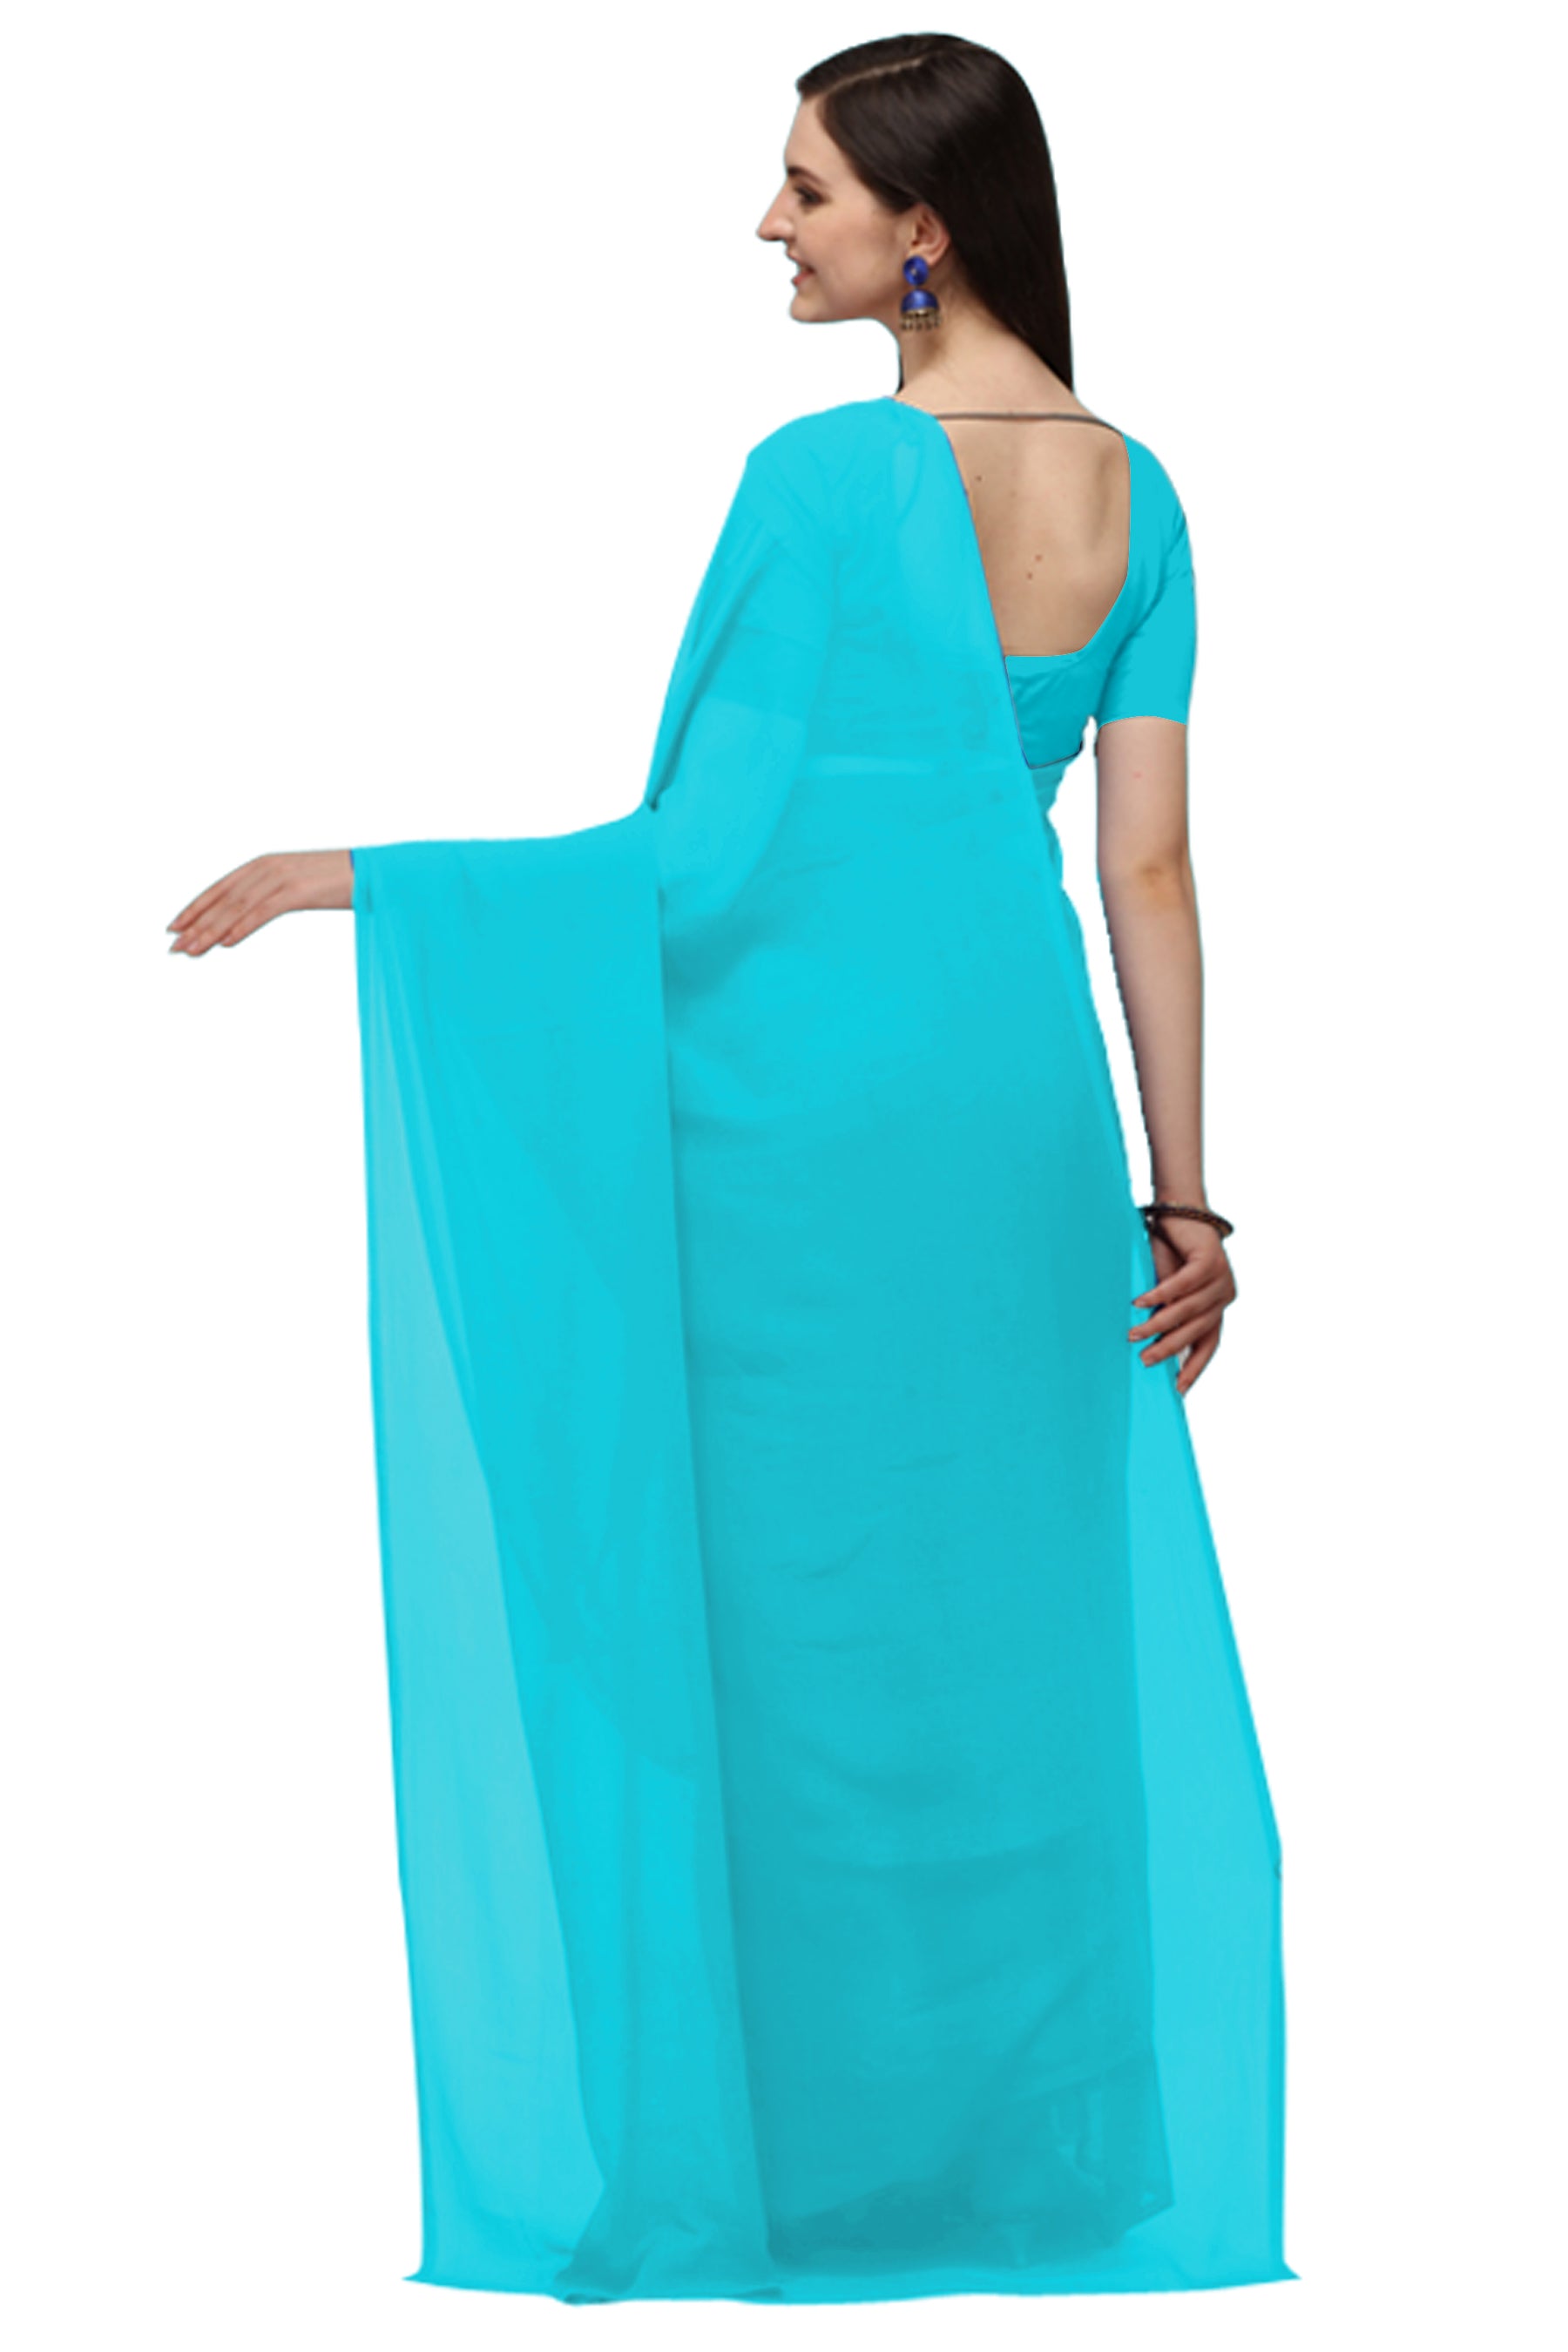 Women's Plain Woven Daily Wear  Formal Georgette Sari With Blouse Piece (Sky Blue) - NIMIDHYA